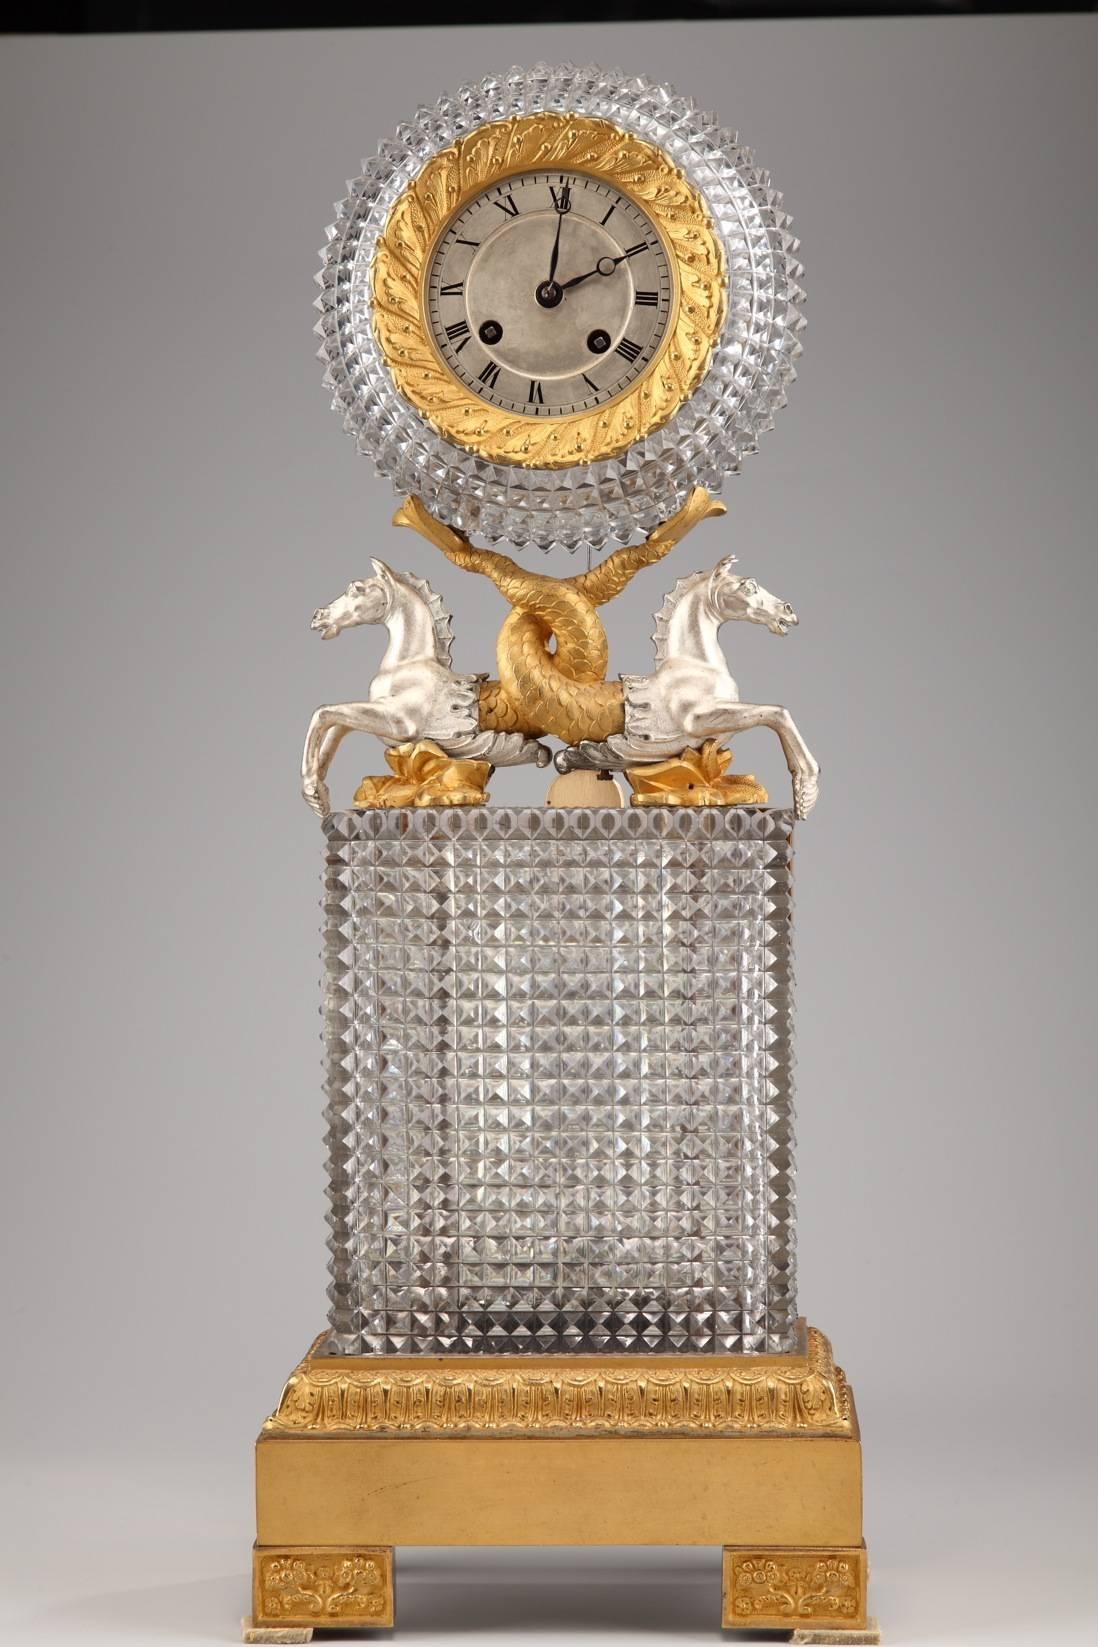 Sizeable Charles X mantel clock composed of a high, cut-crystal base topped by two silvery bronze horses whose torsos transform into intertwining, gilt bronze tails. The horses support the silvery bronze dial, with Roman numerals marking the hours.